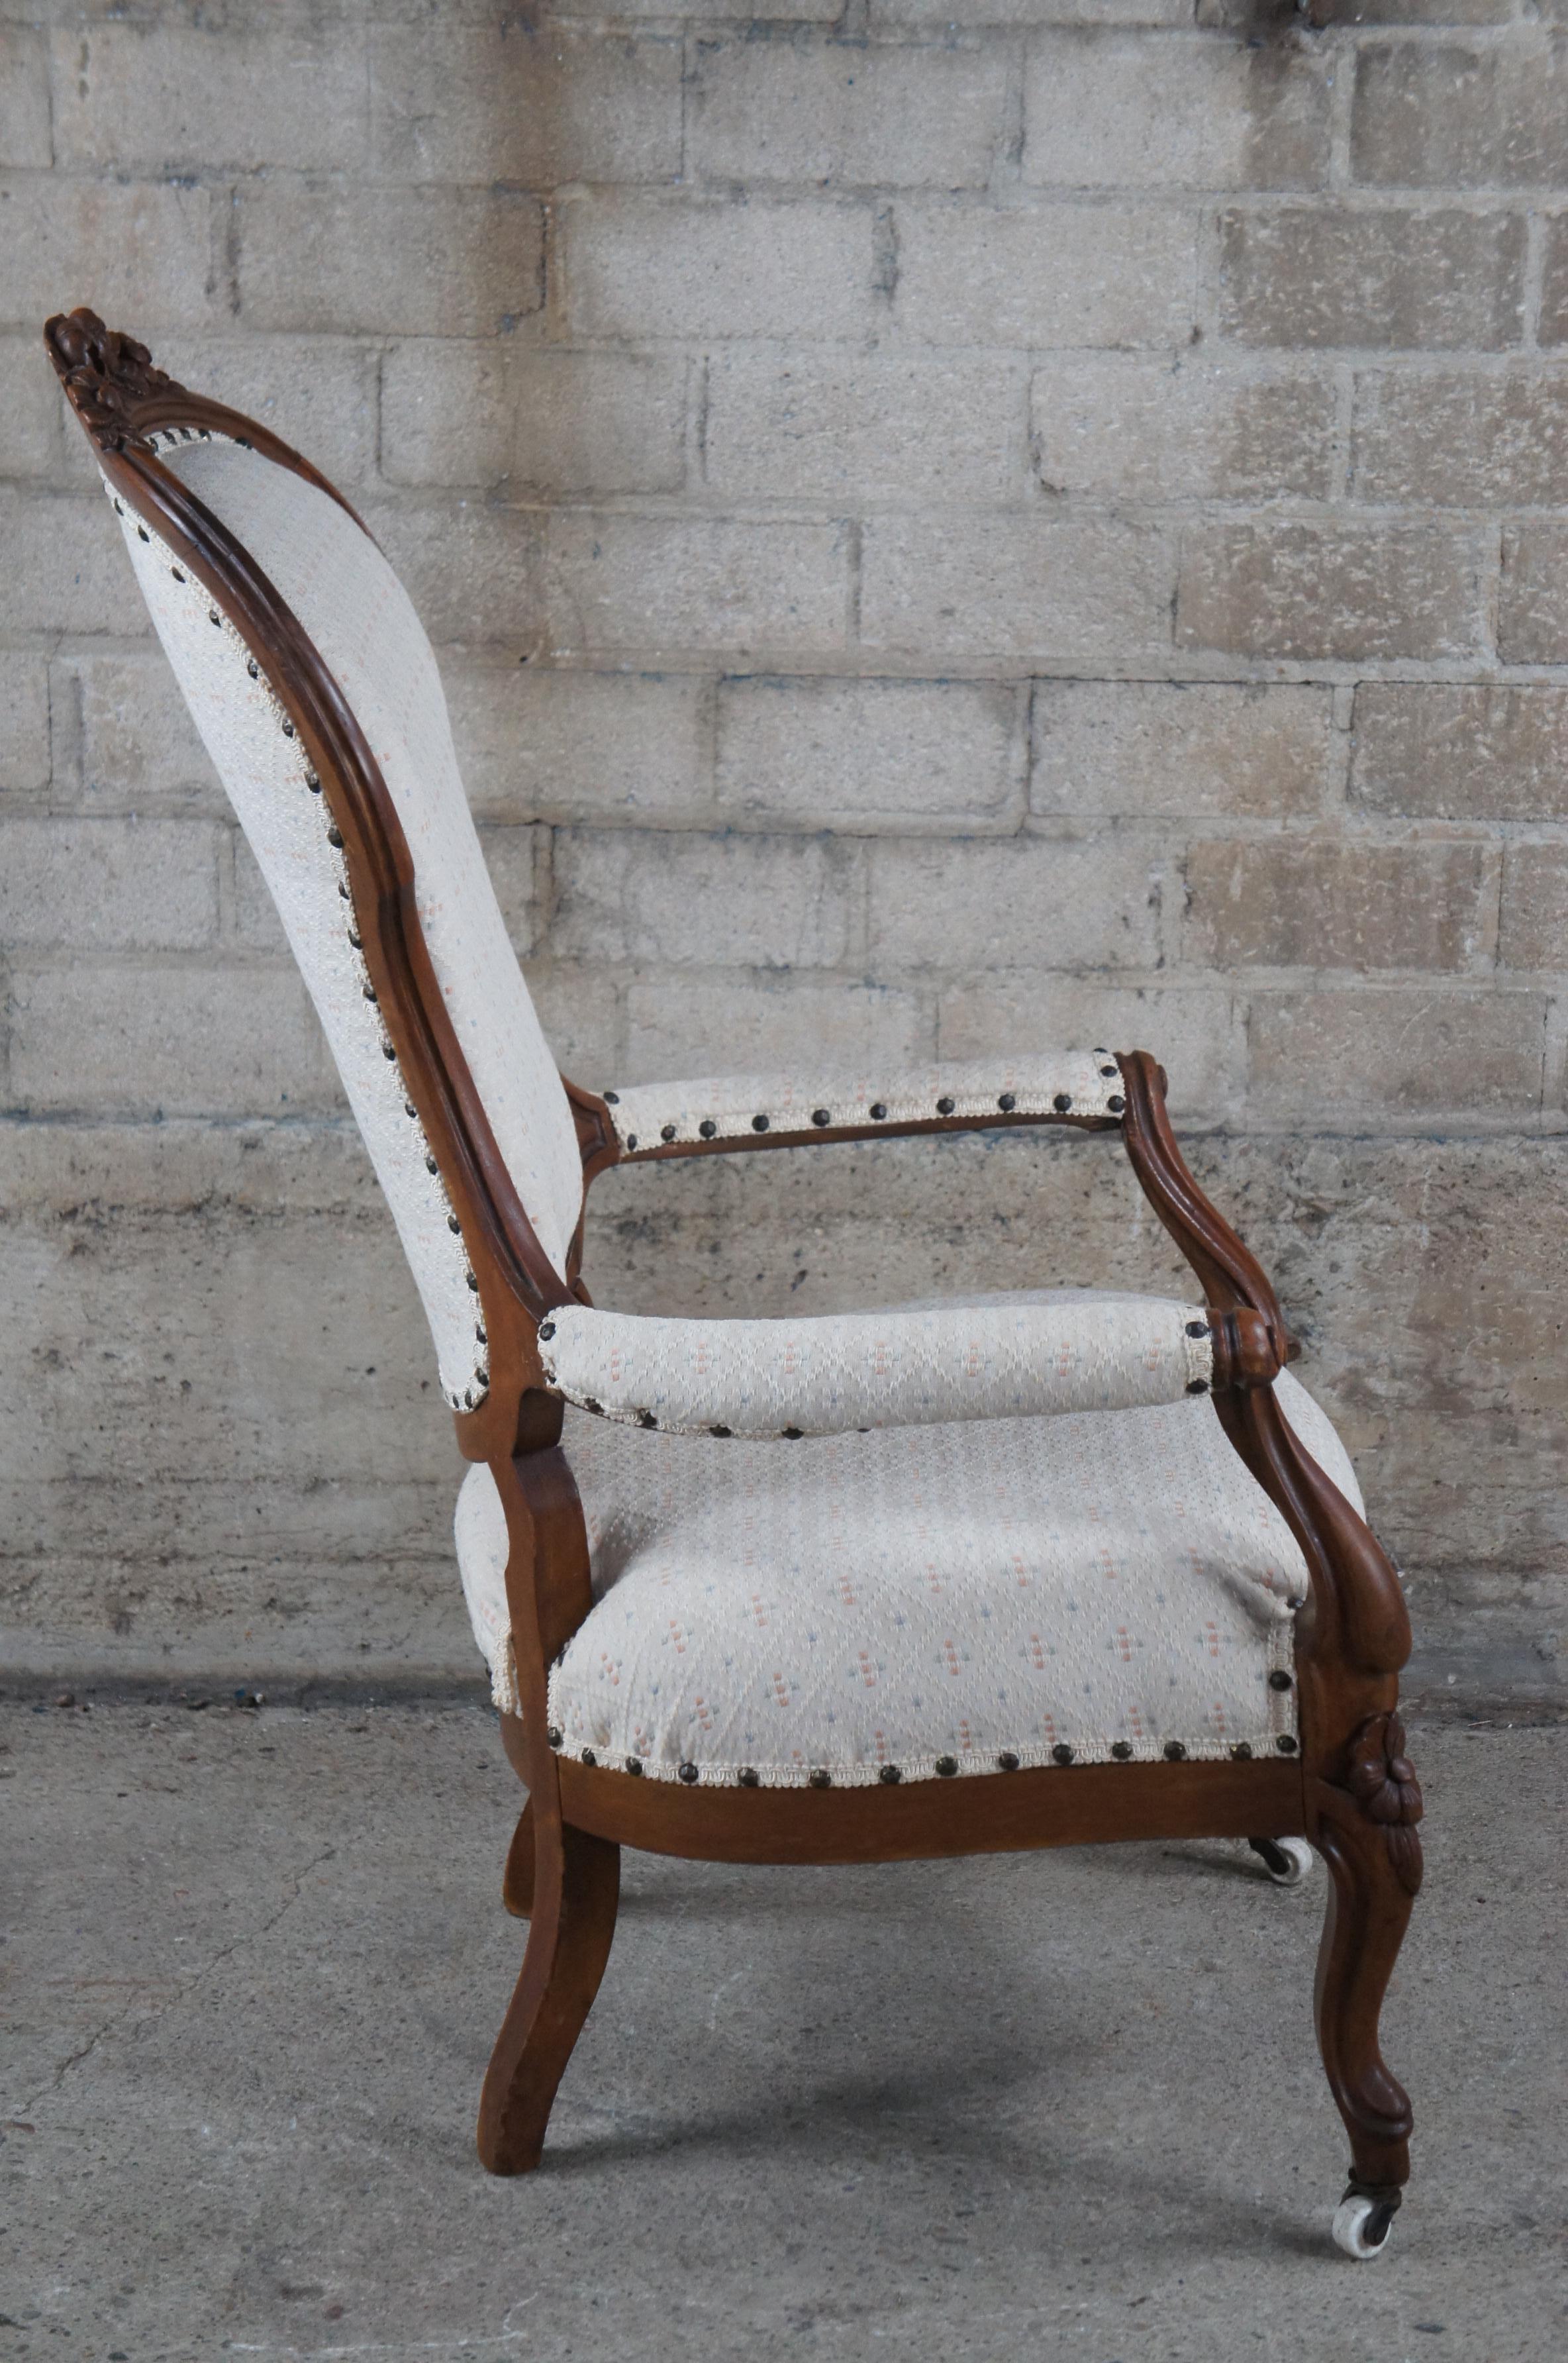 Upholstery Antique 19th Century Victorian Walnut Floral Carved Spoon Back Parlor Armchair